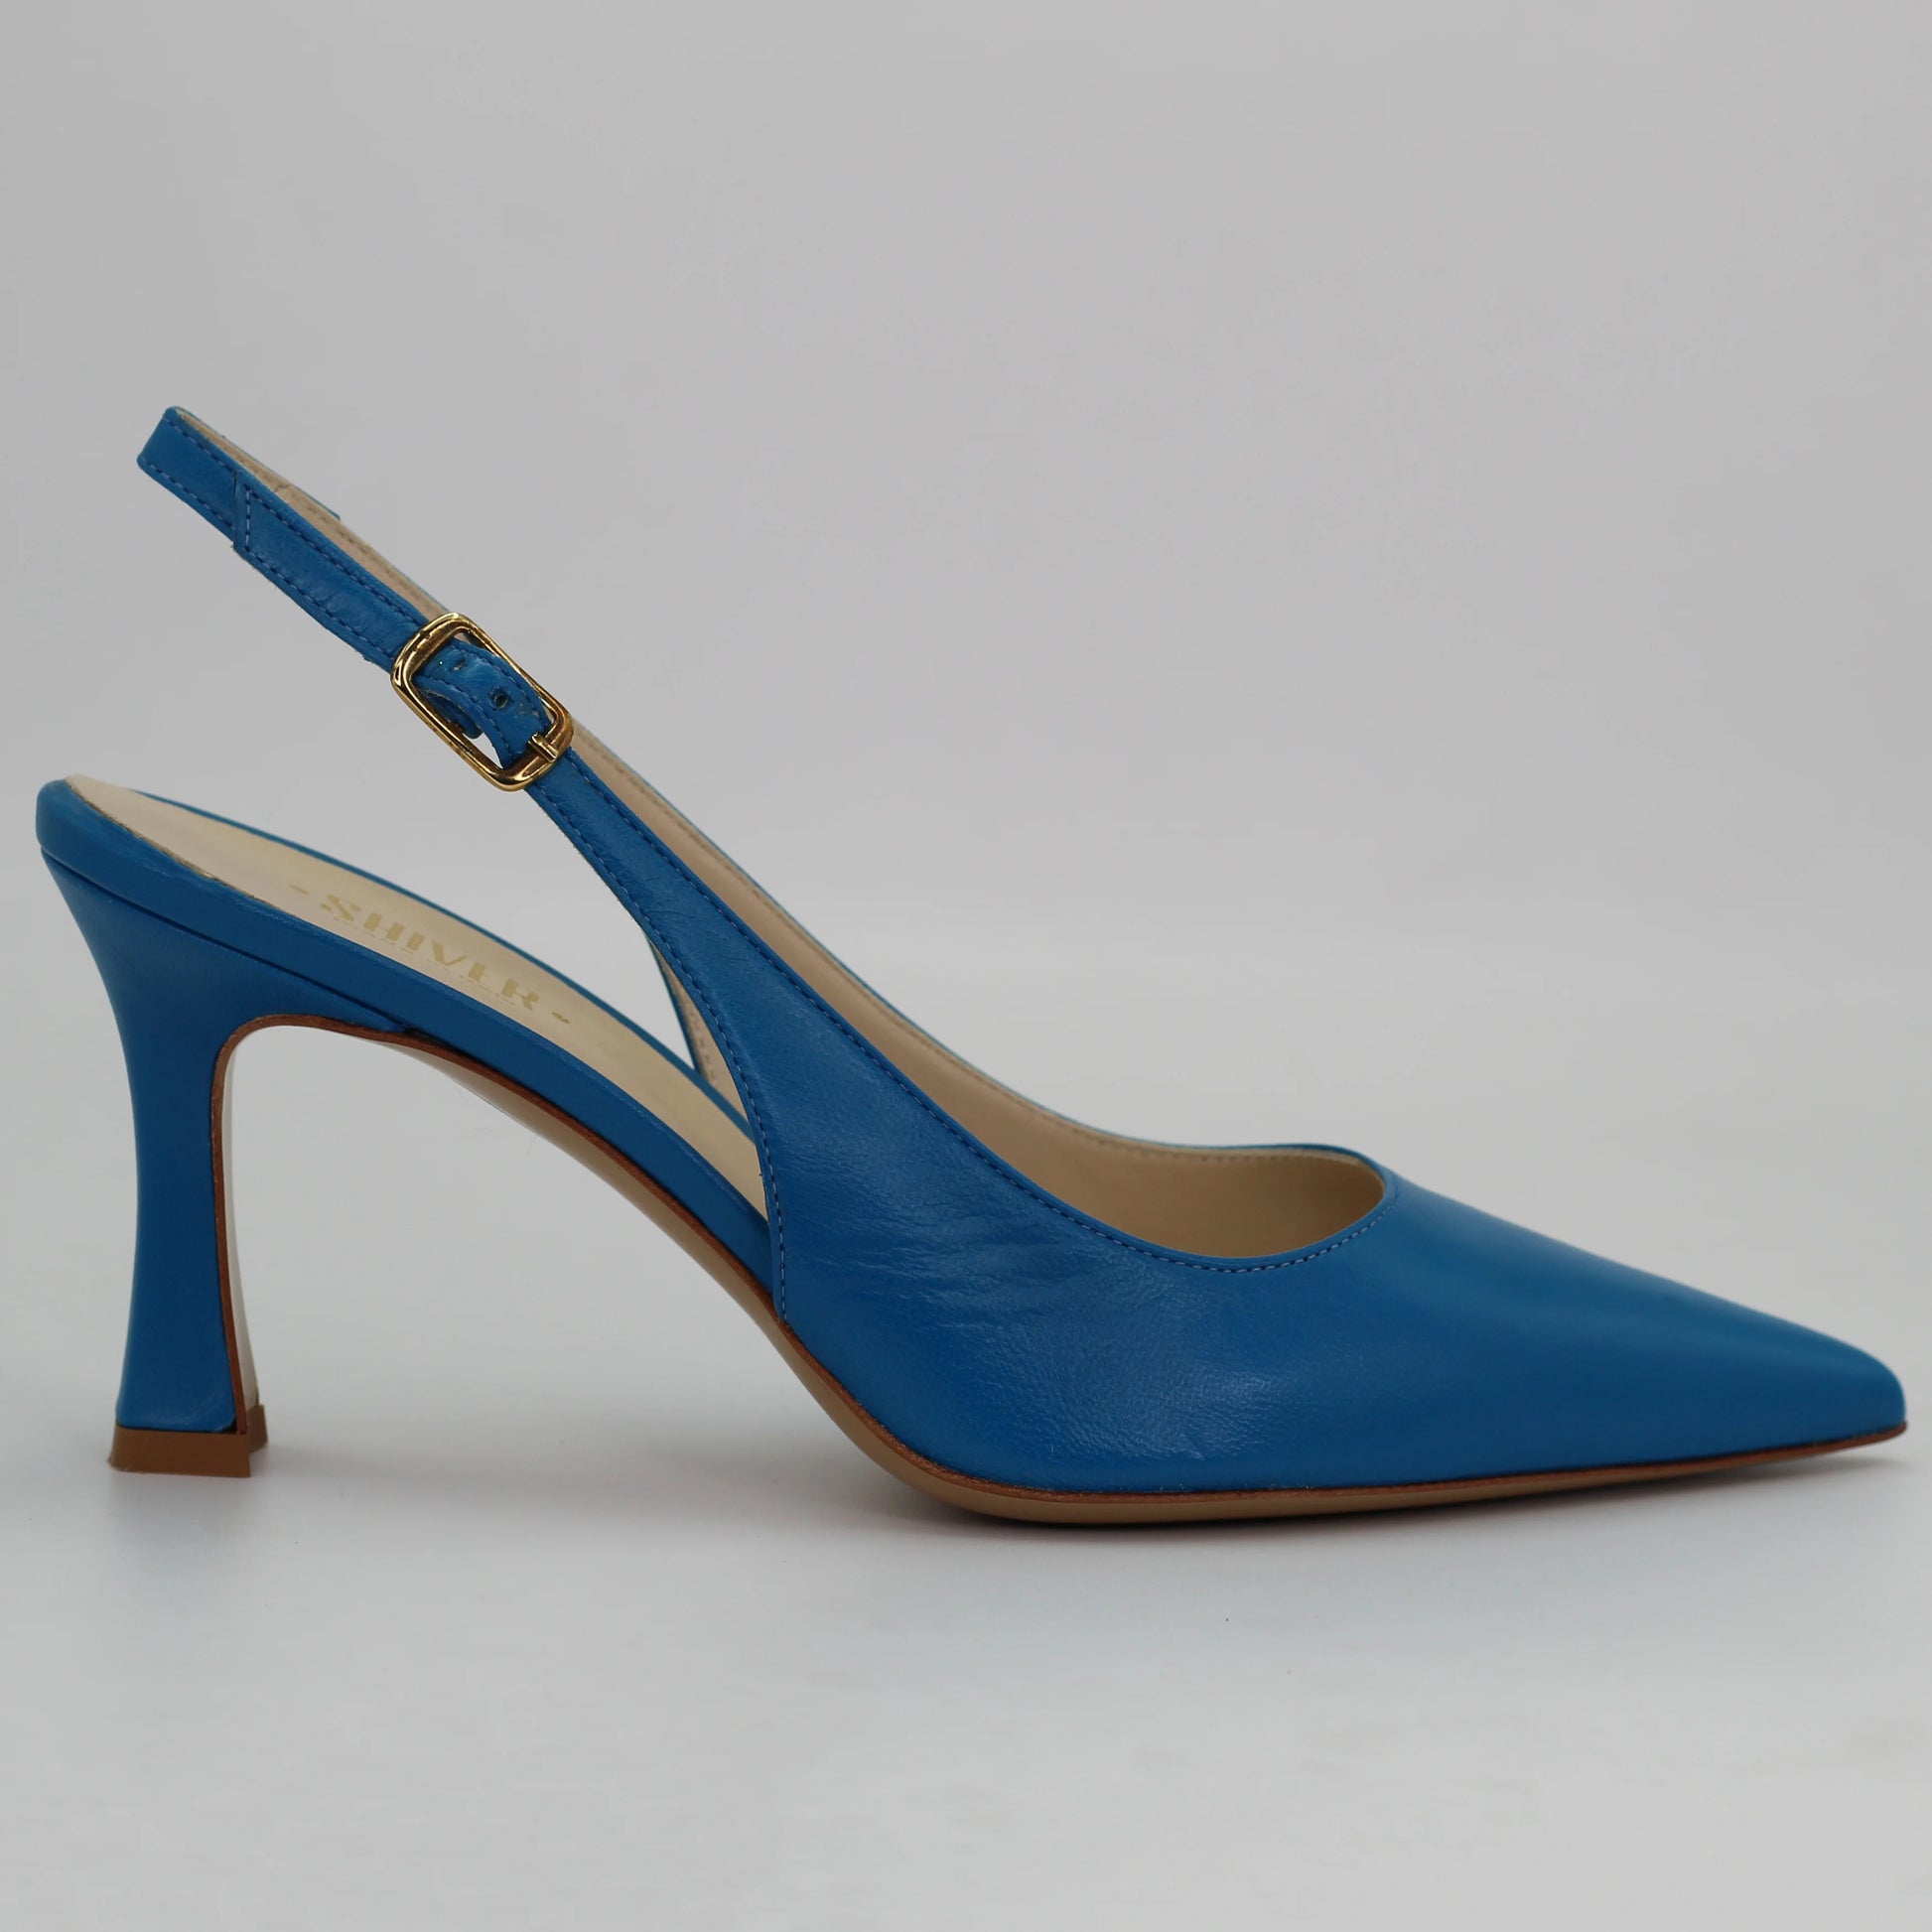 Shop Handmade Italian Leather sling back in blue (MPE581) or browse our range of hand-made Italian shoes in leather or suede in-store at Aliverti Cape Town, or shop online. We deliver in South Africa & offer multiple payment plans as well as accept multiple safe & secure payment methods.